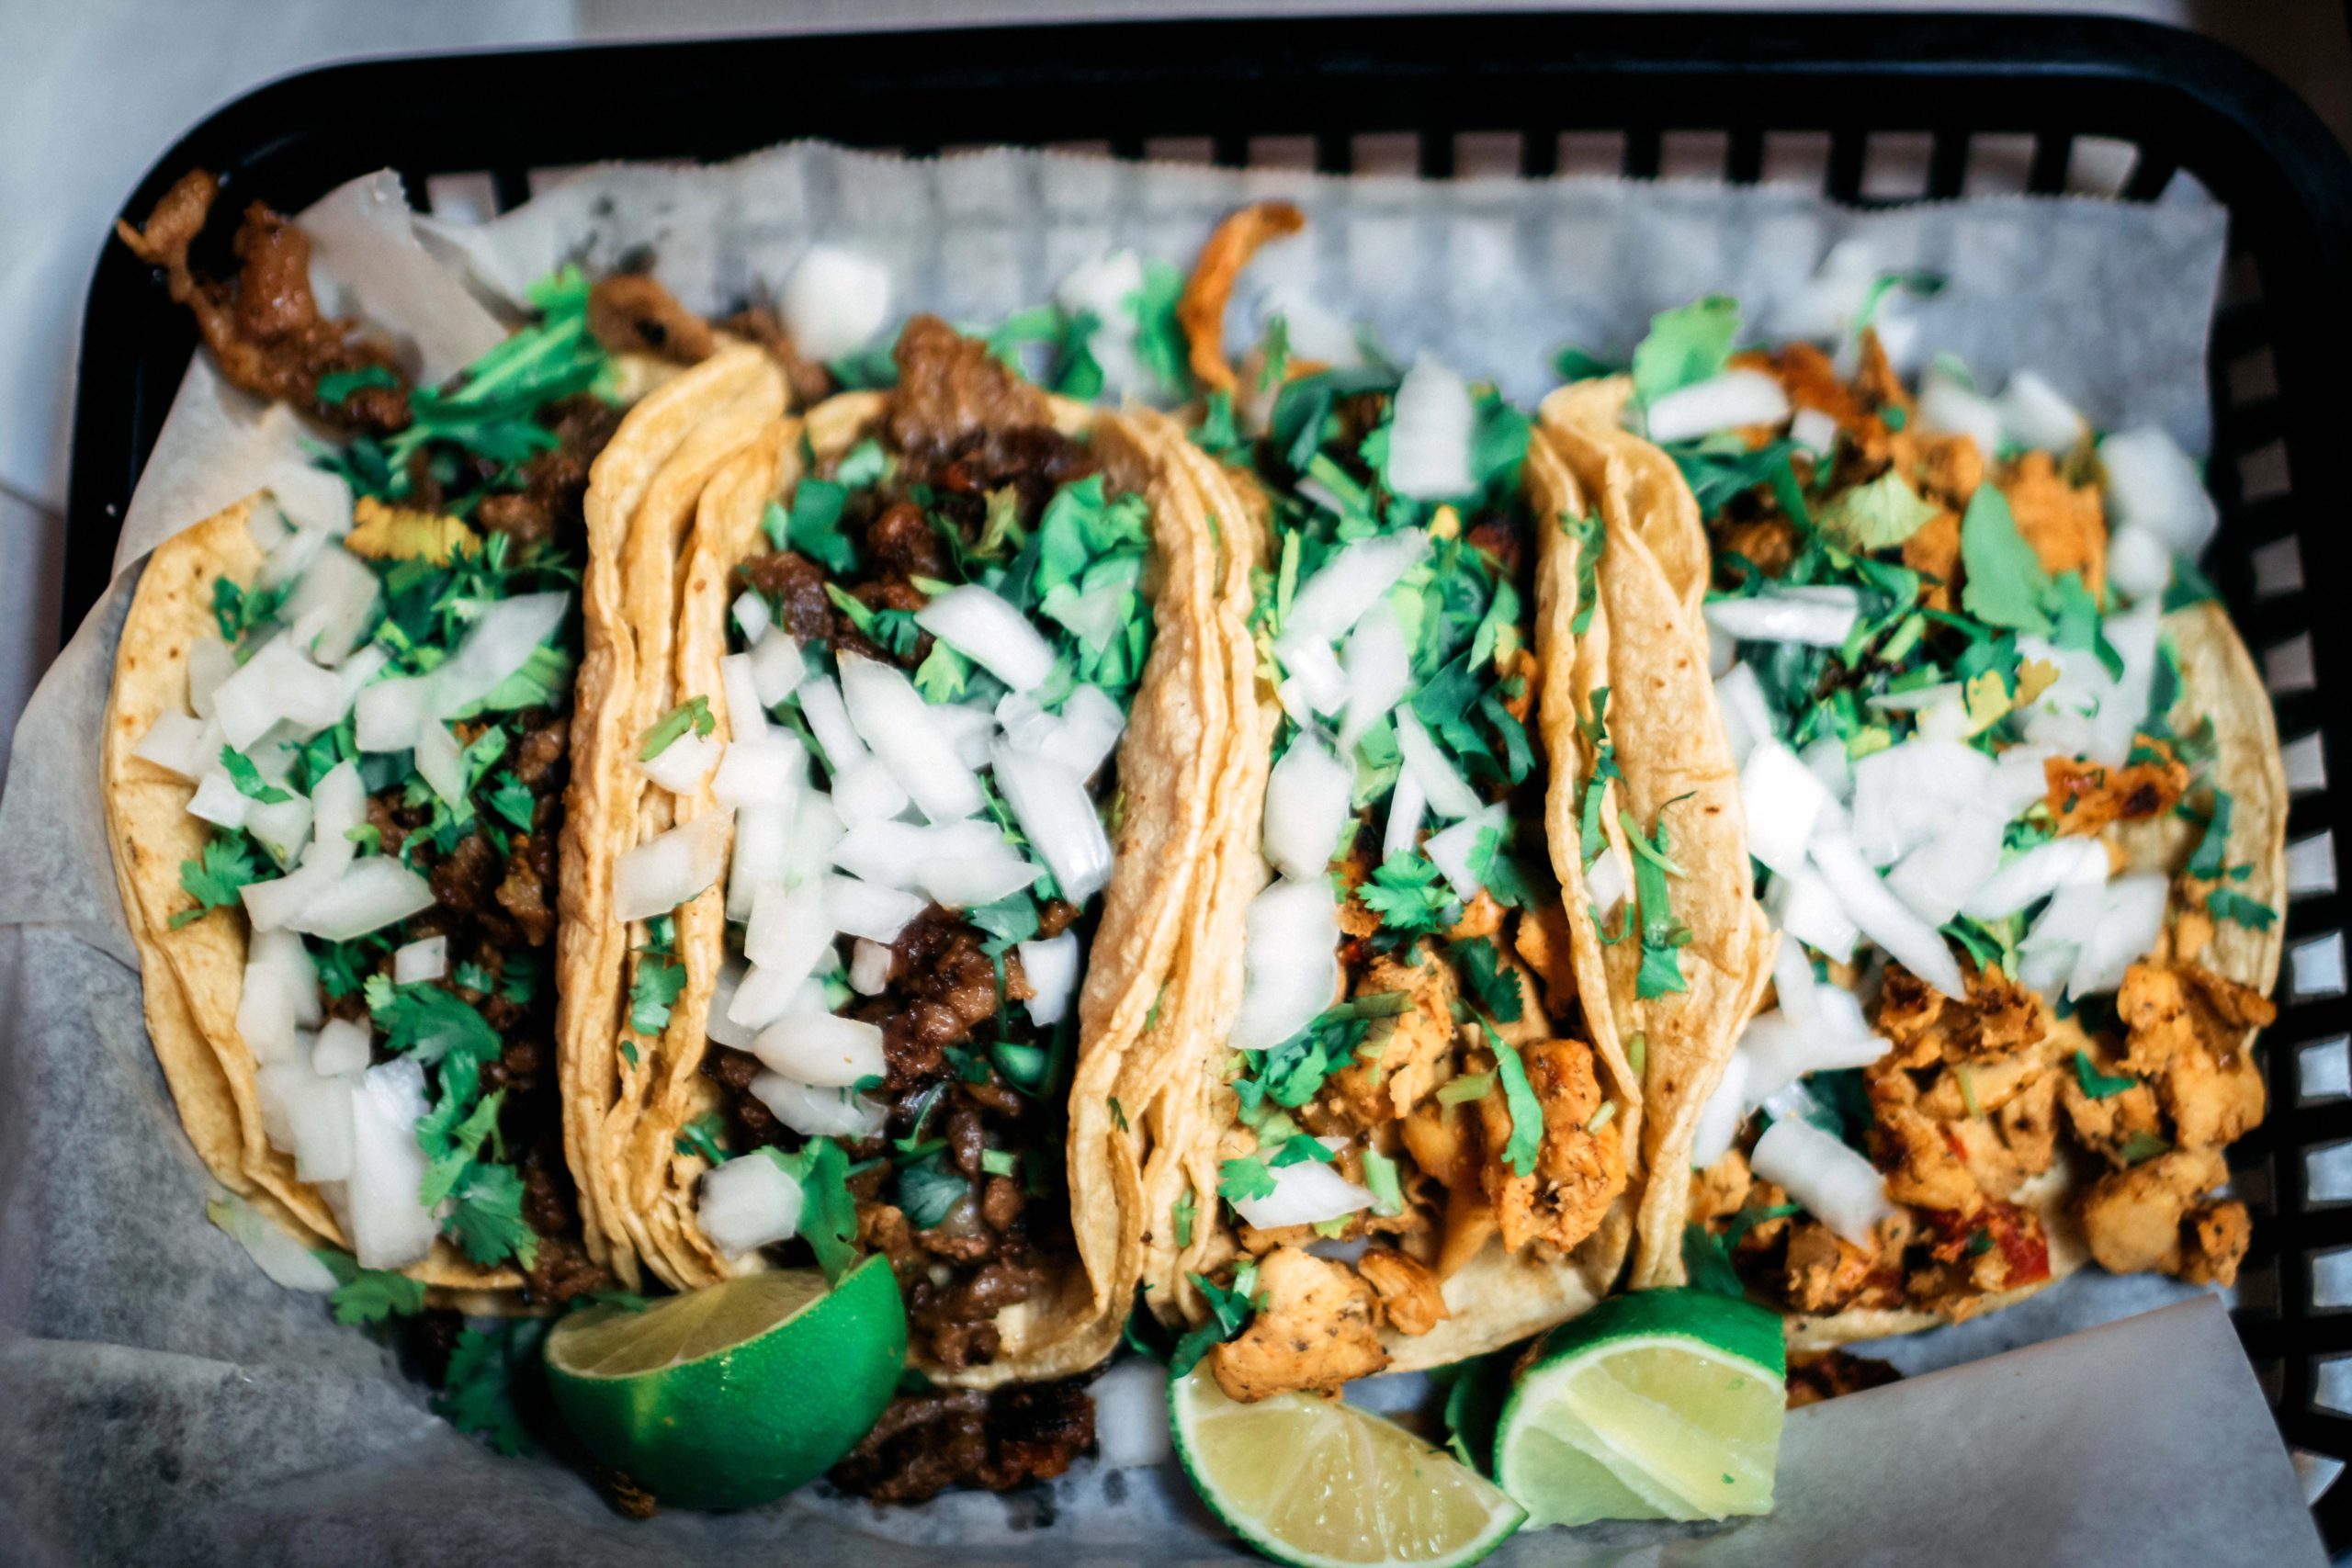 D.C. Business “Taco City” Shows Tremendous Growth One Year In